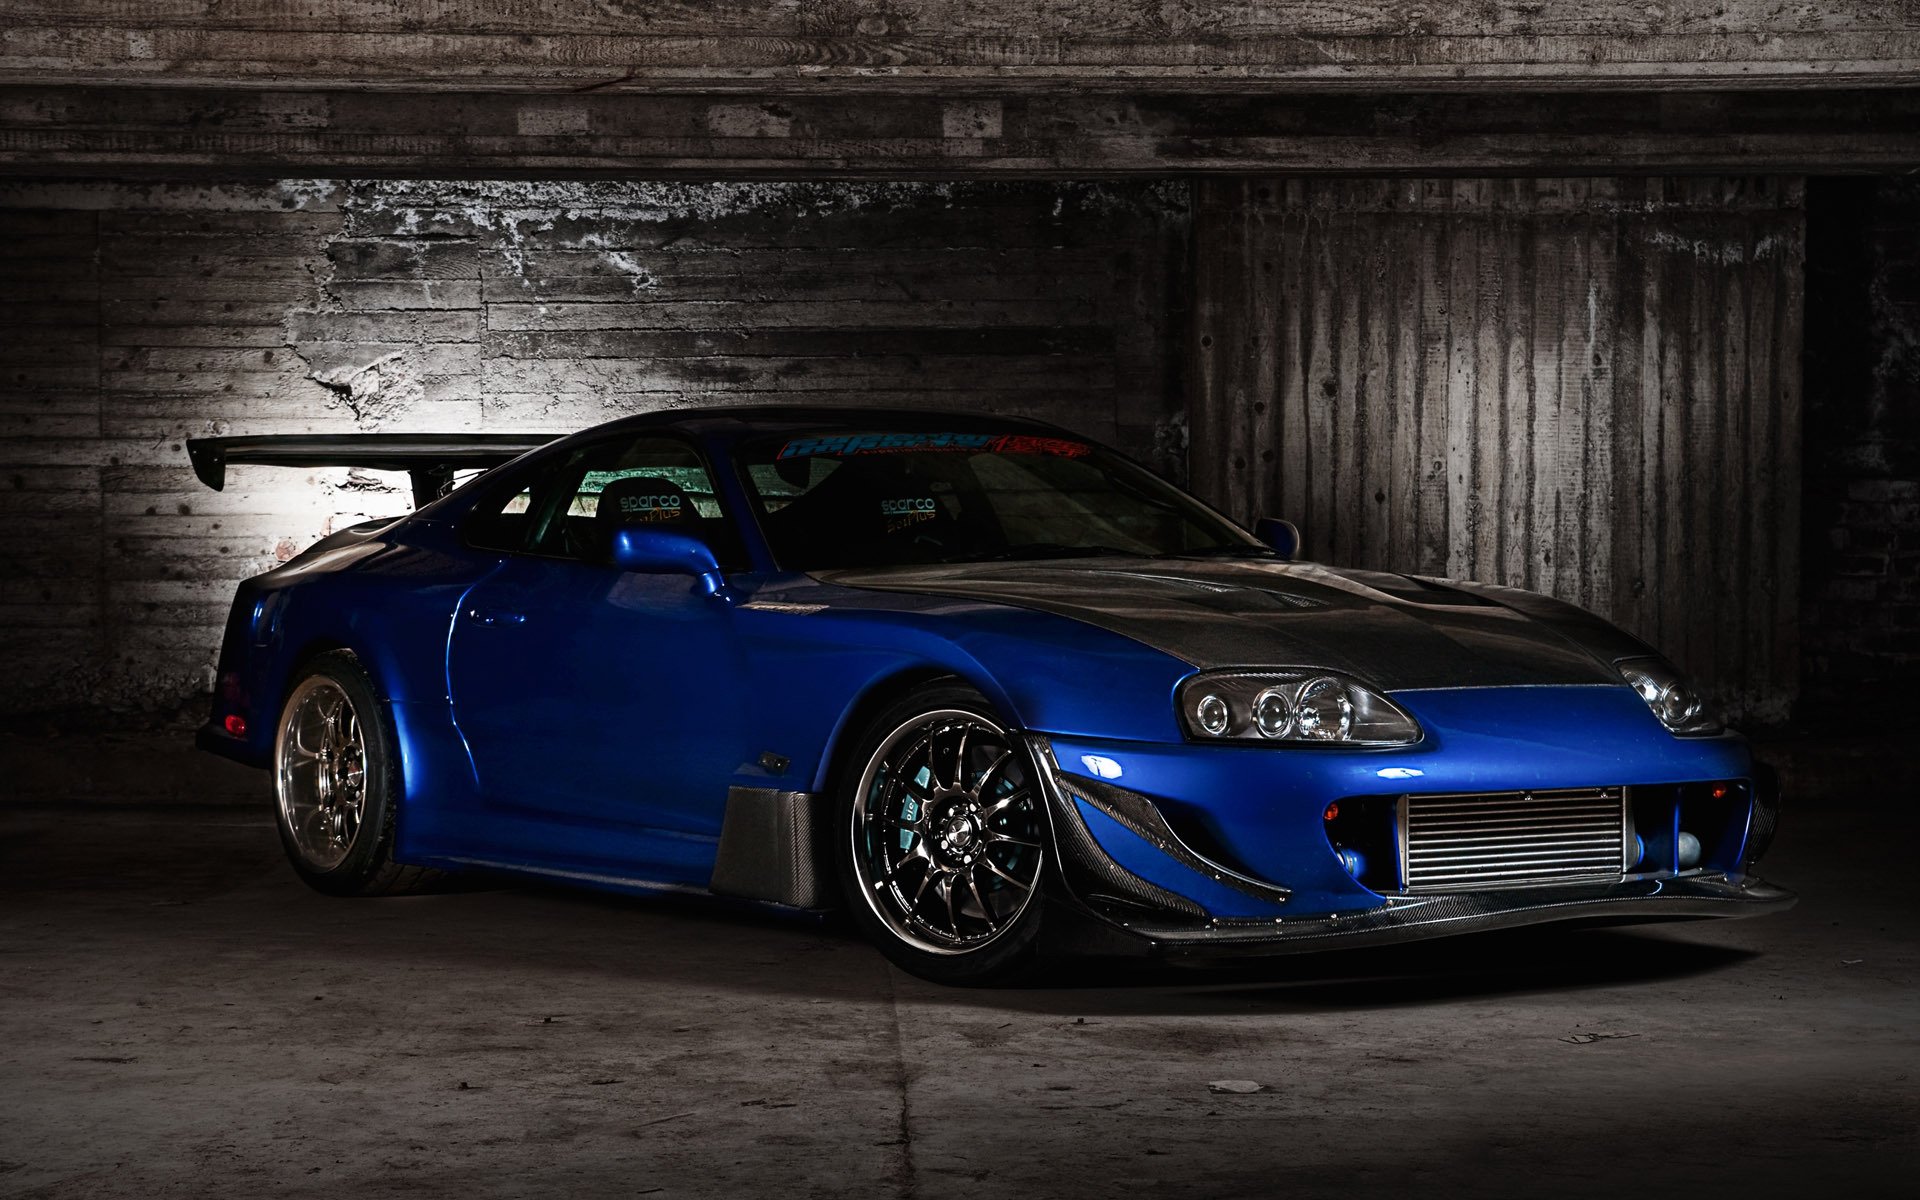 toyota, Supra, Tuning, Cars, Coupe, Japan, Turbo Wallpapers HD